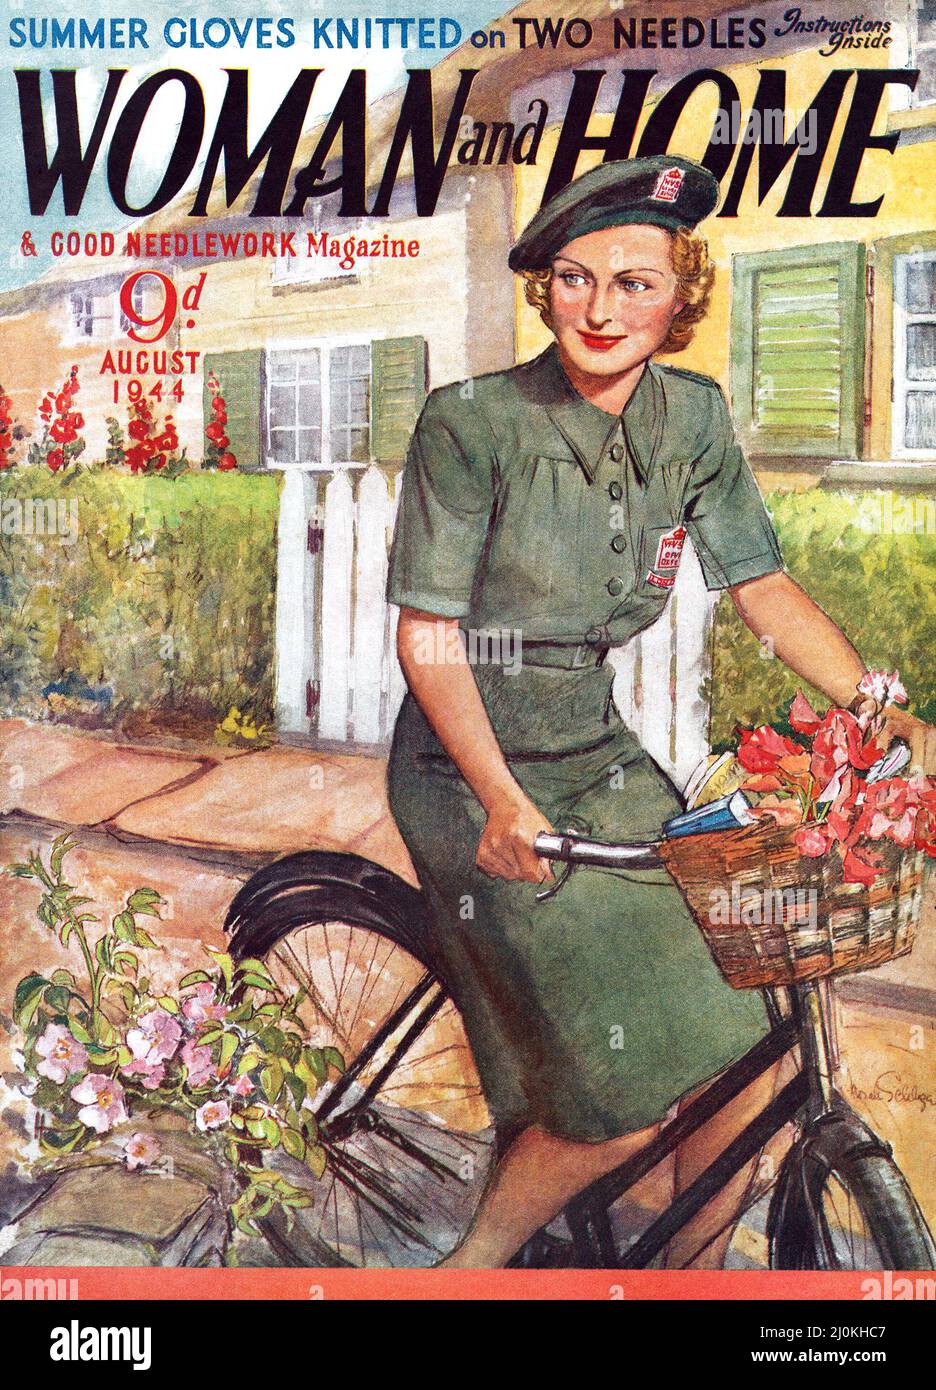 Vintage wartime magazine front cover of Woman And Home for August 1944. Stock Photo